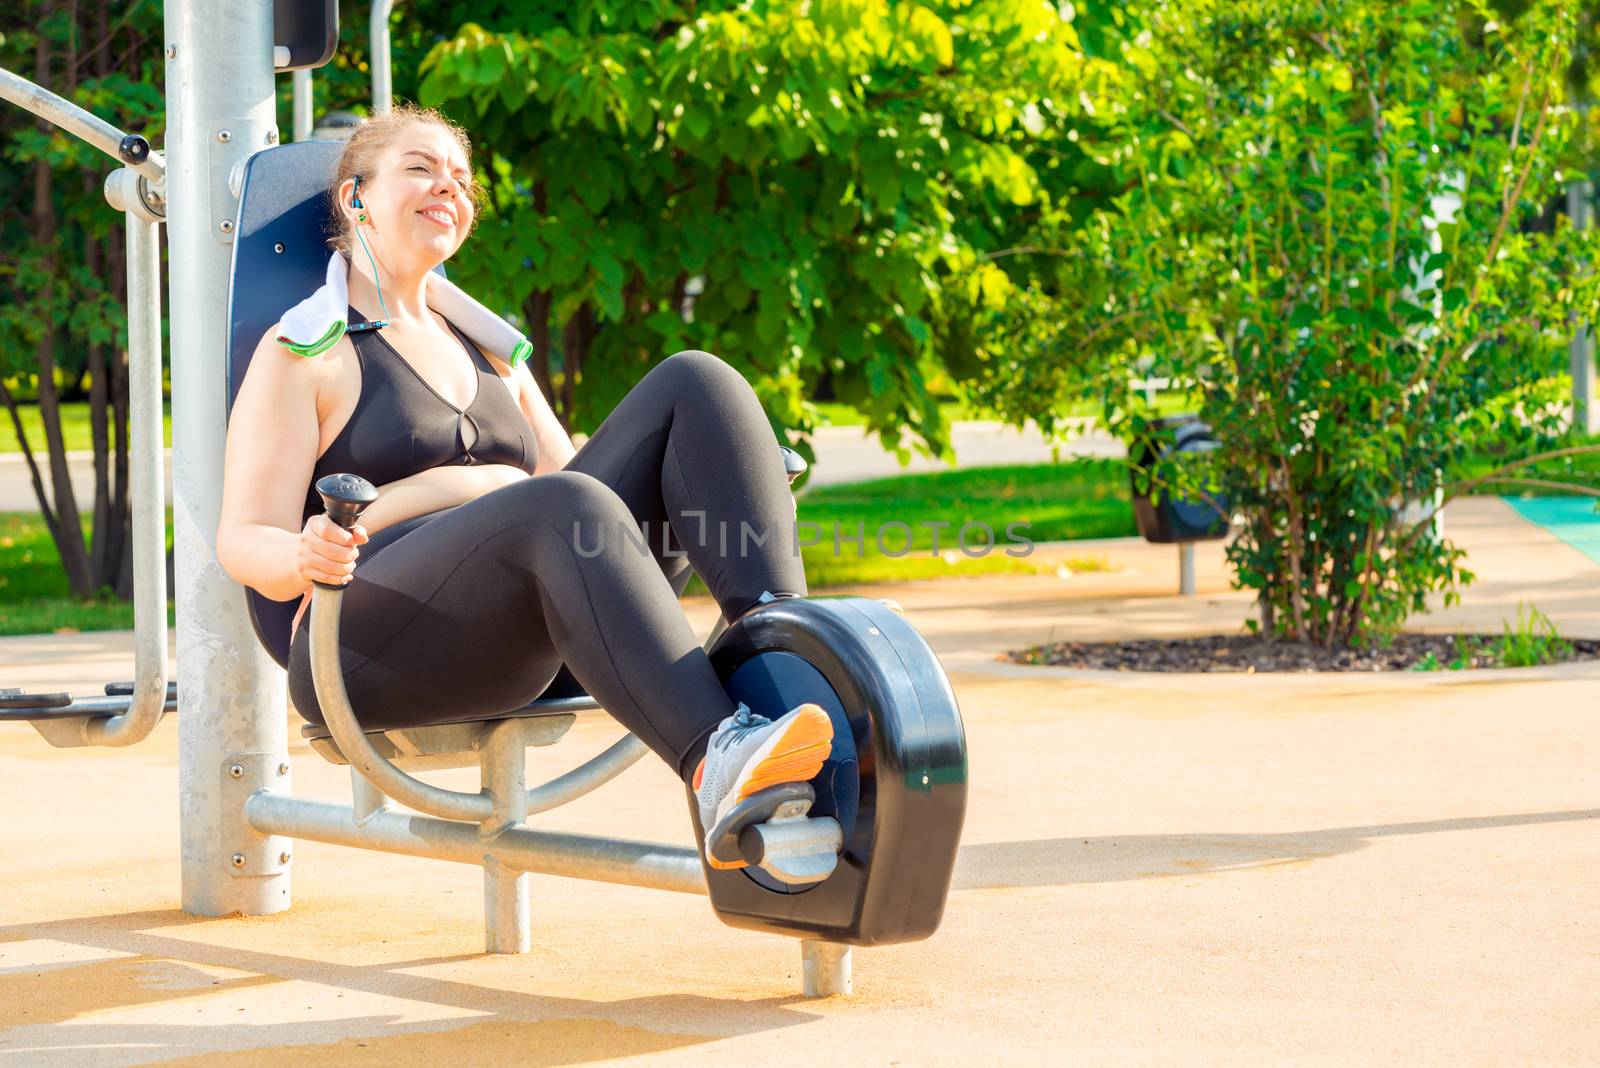 happy and active oversized woman doing exercise on a stationary bike in a city park